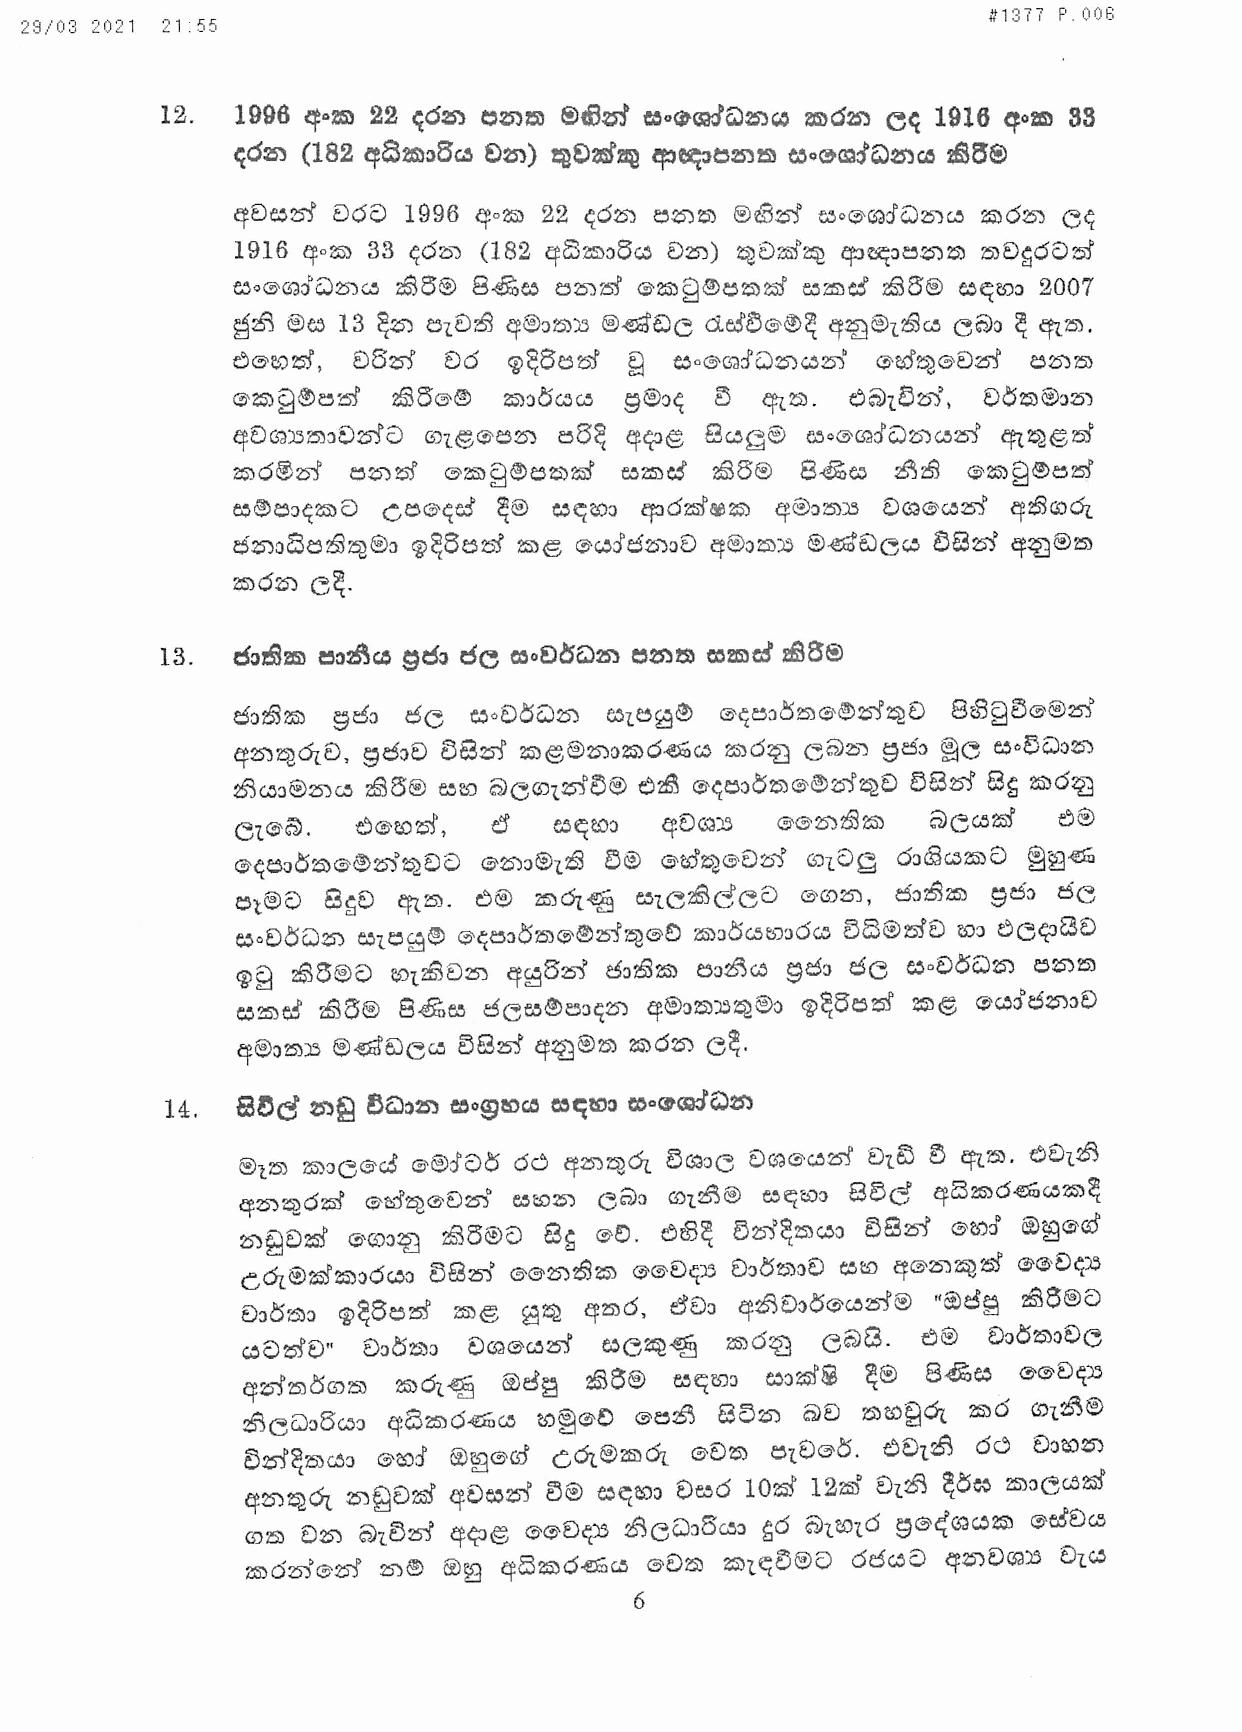 Cabinet Decision on 29.03.2021 1 page 006